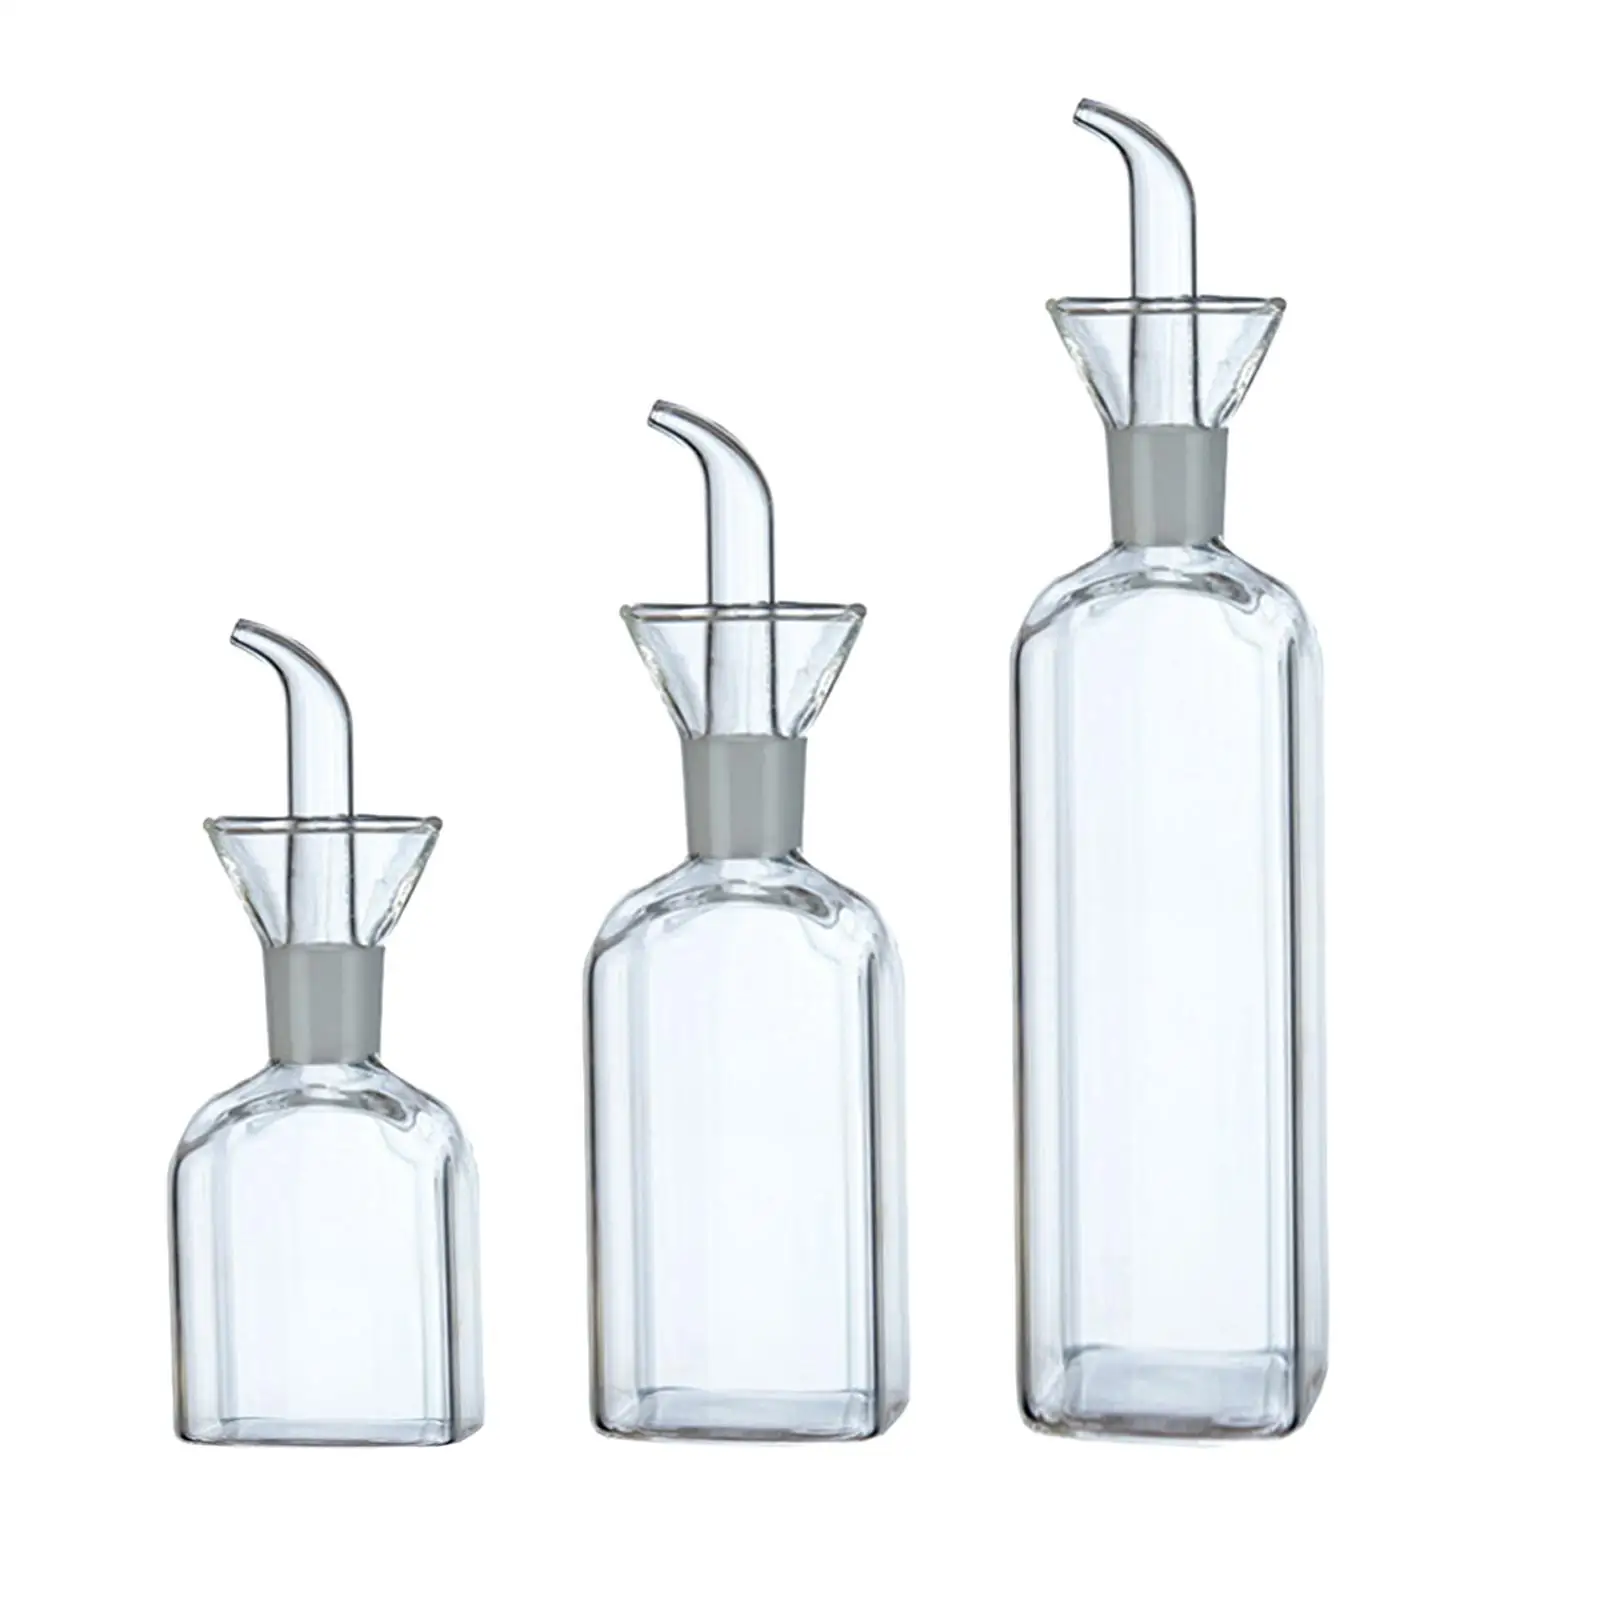 Glass   Bottle Storage Jars No  Needed Supplies Gadgets Clear Tools Wine Container for Cooking Buffet Kitchen 